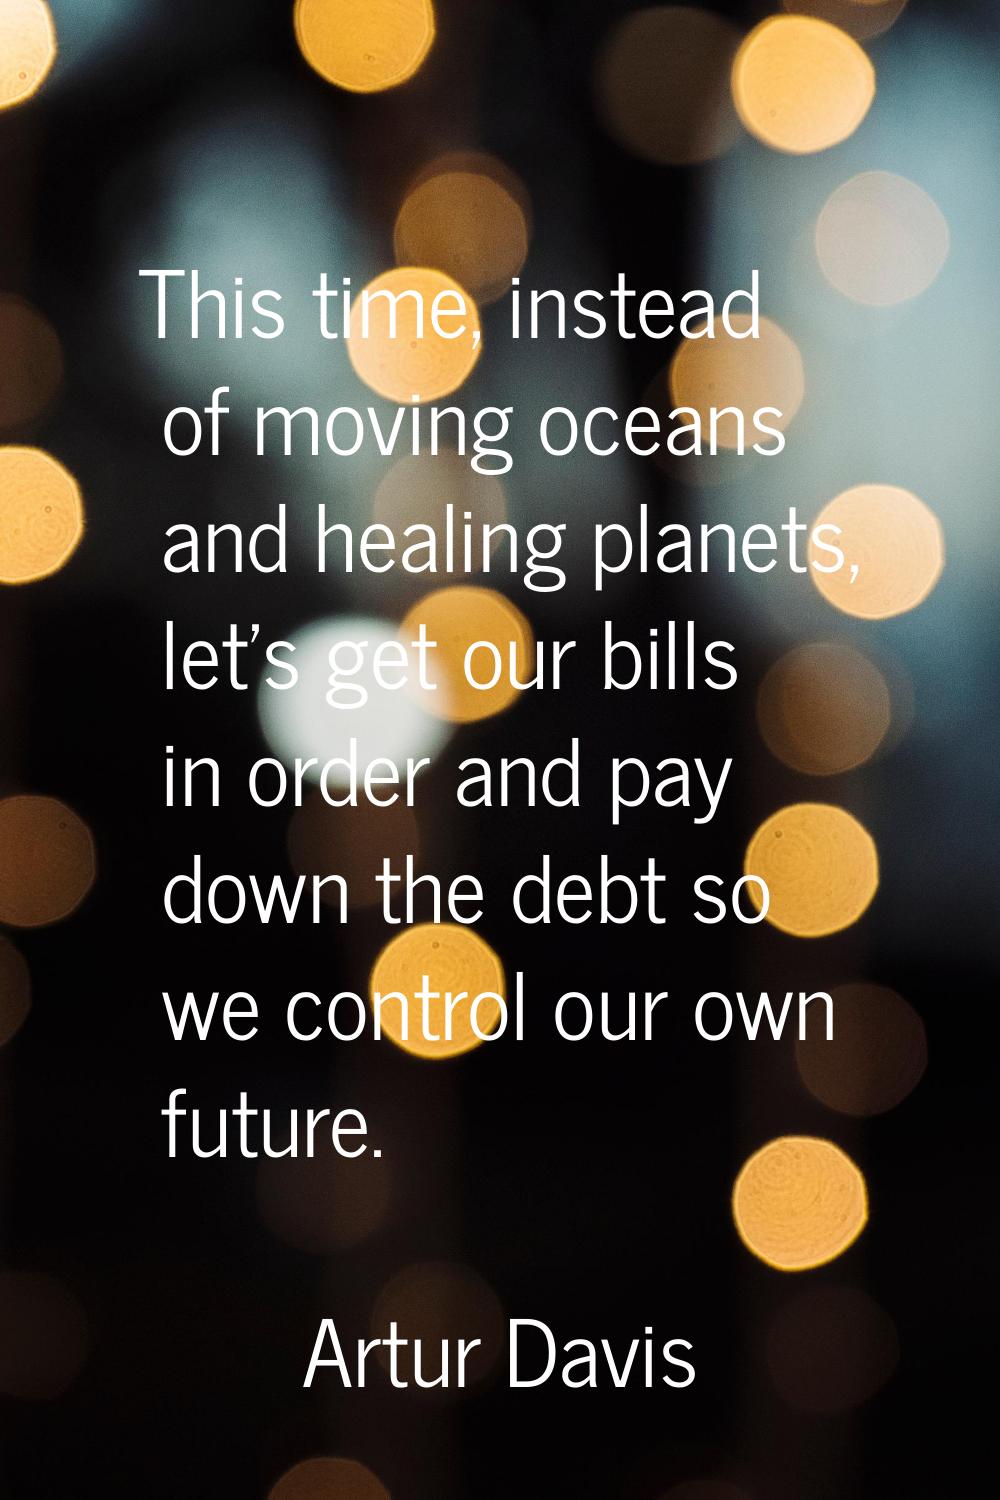 This time, instead of moving oceans and healing planets, let's get our bills in order and pay down 